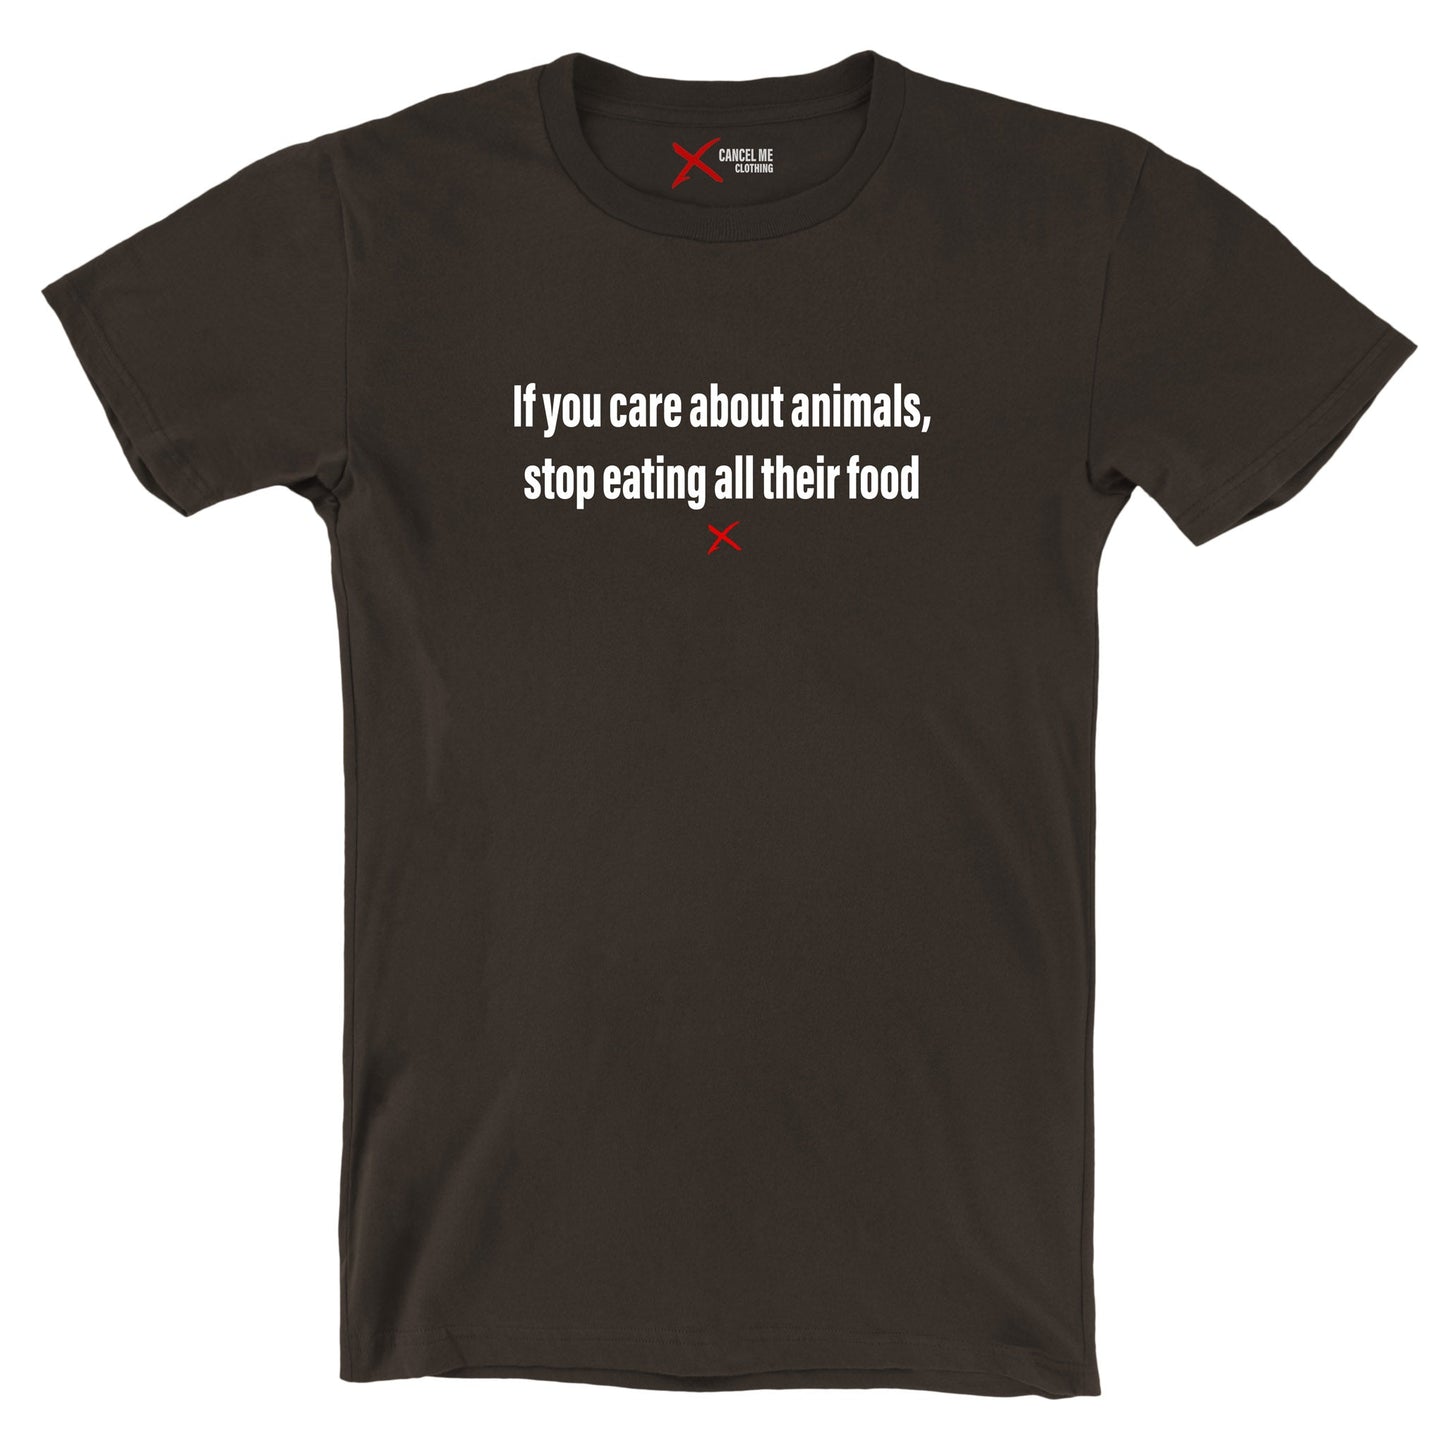 If you care about animals, stop eating all their food - Shirt